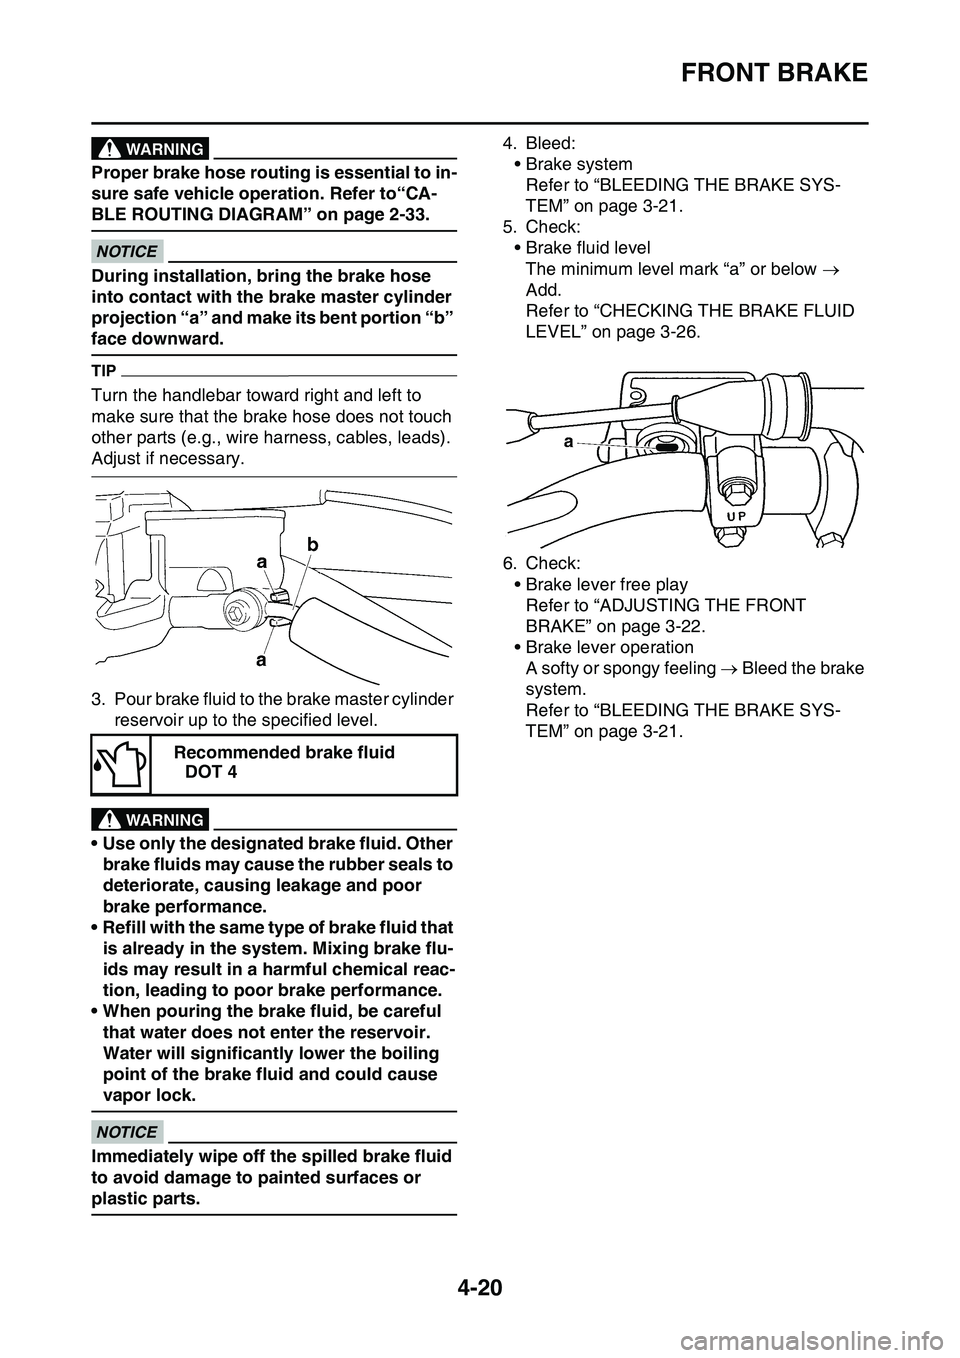 YAMAHA YZ450F 2014  Owners Manual FRONT BRAKE
4-20
WARNING
Proper brake hose routing is essential to in-
sure safe vehicle operation. Refer to“CA-
BLE ROUTING DIAGRAM” on page 2-33.
ECA1DX1007
NOTICE
During installation, bring the